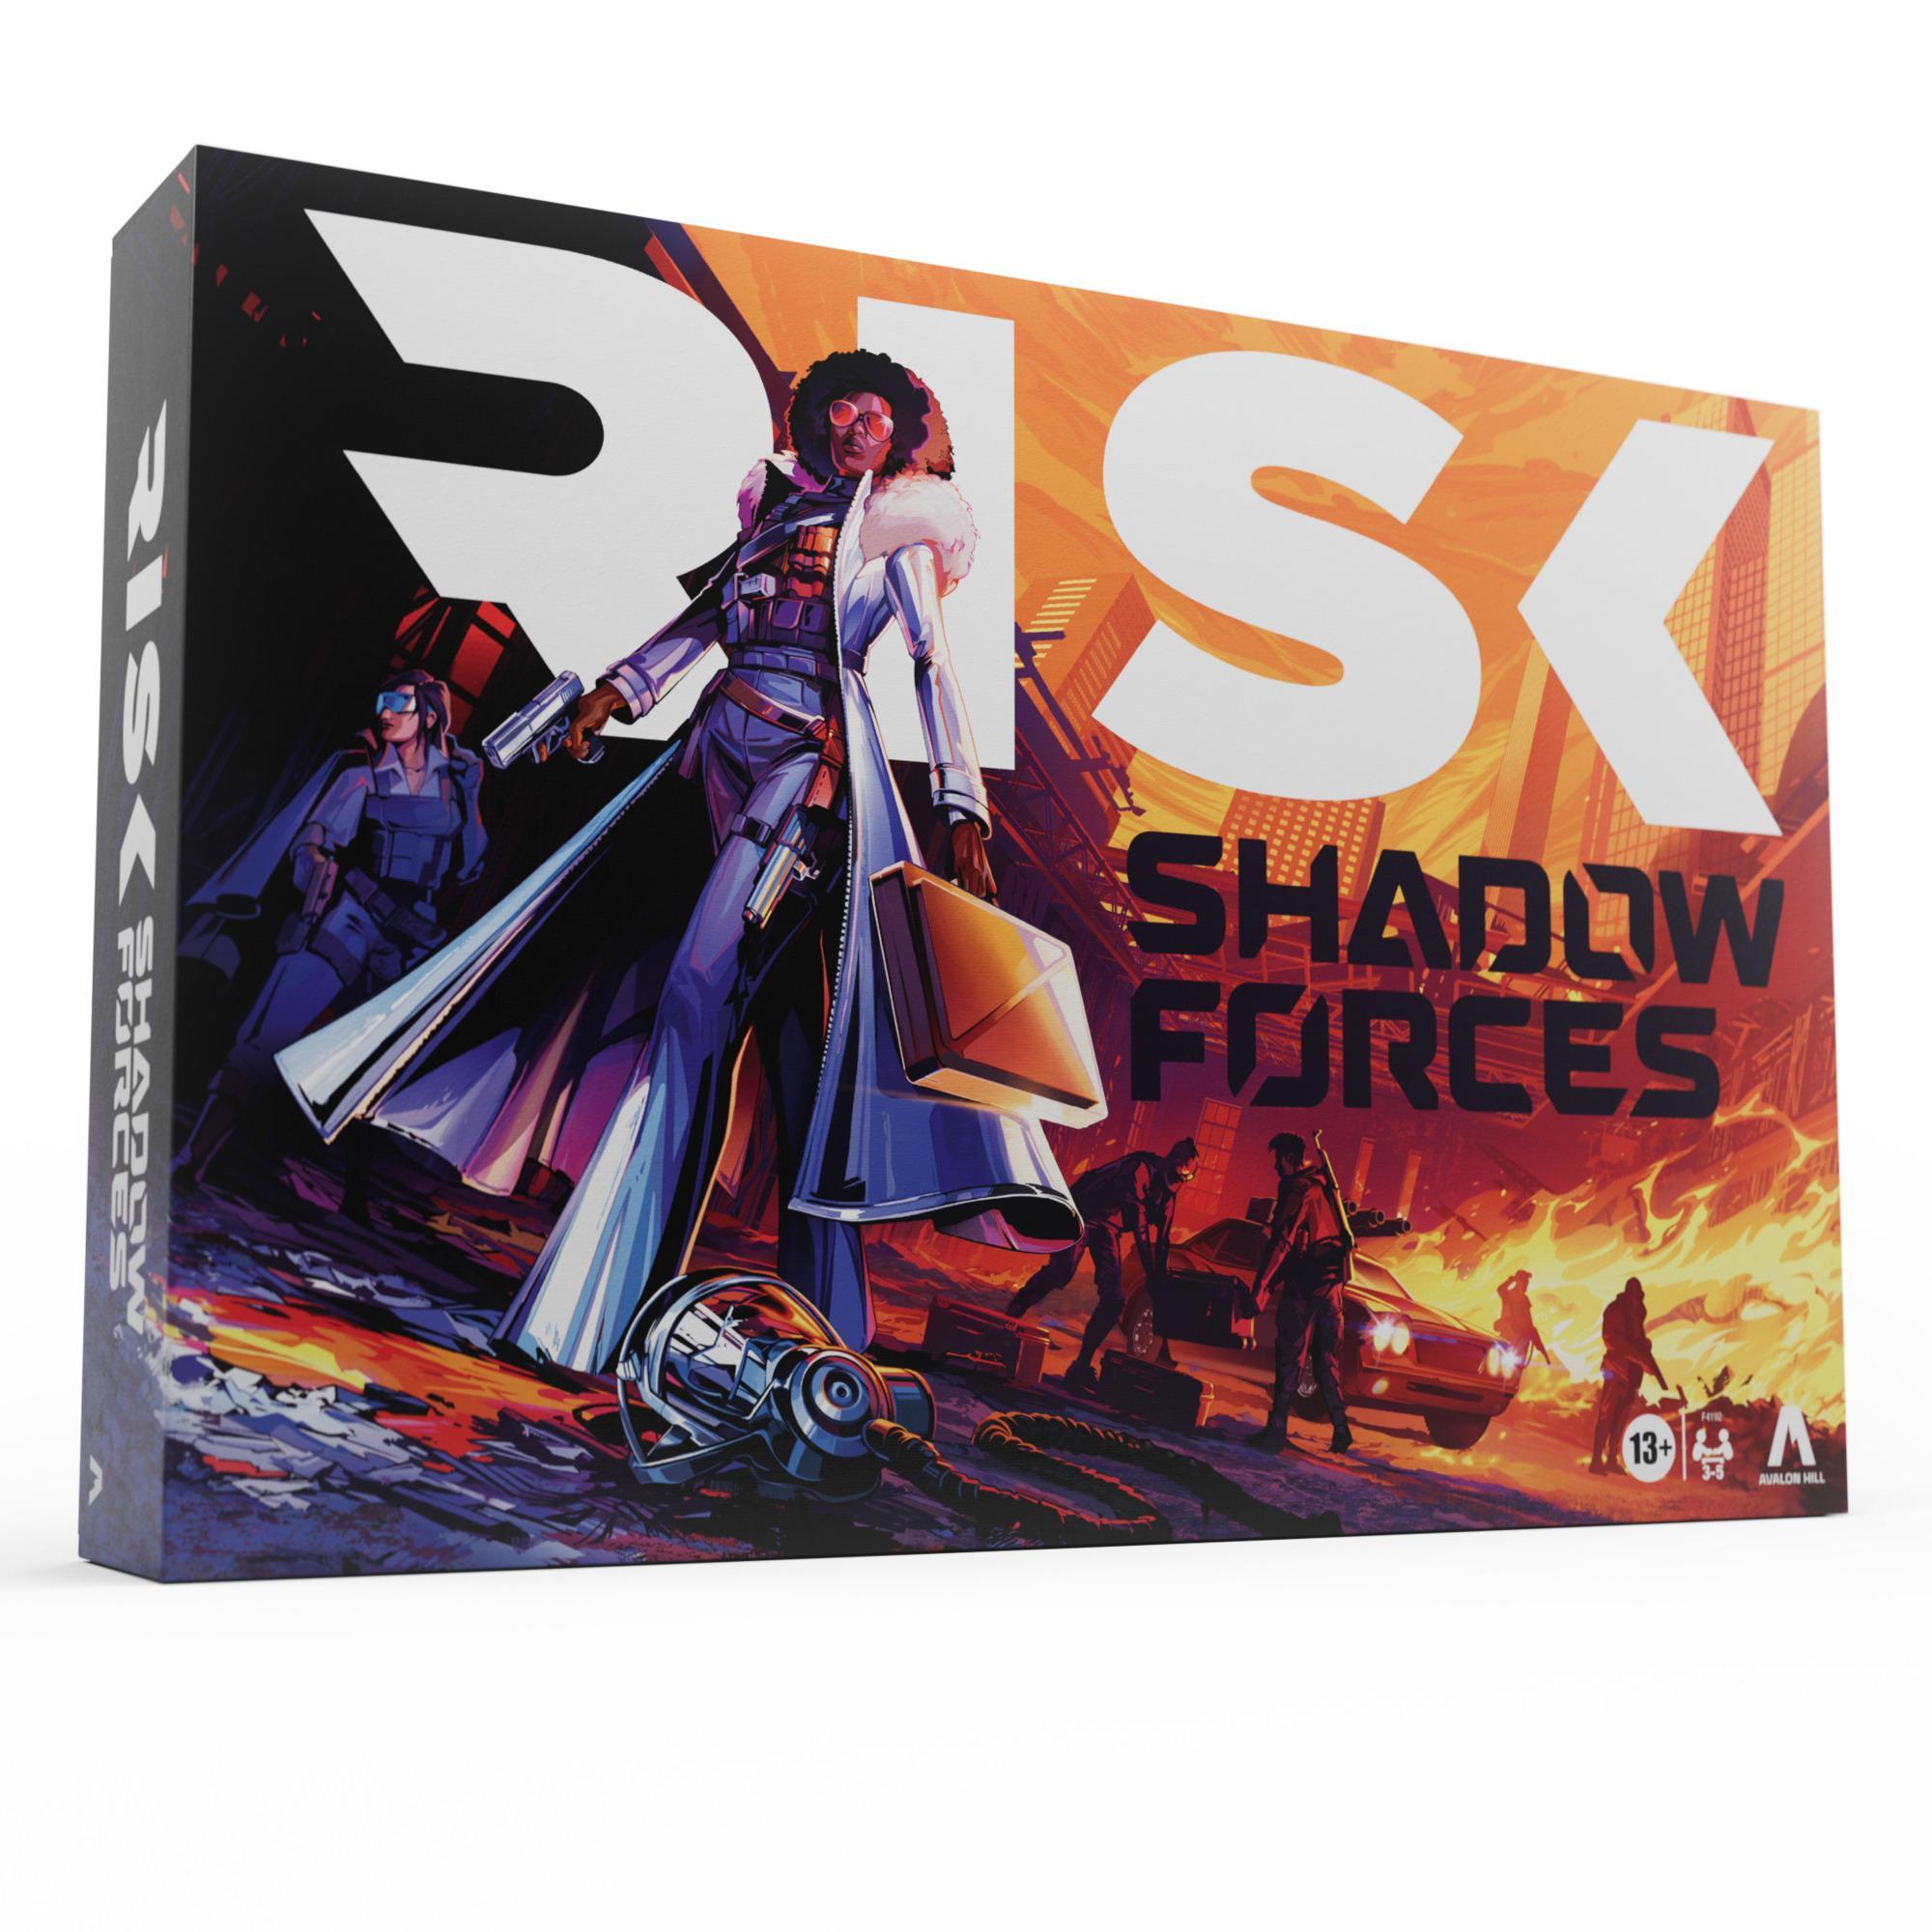 Risk Shadow Forces Strategy Game, Legacy Board Game, Board Game for Adults and Family Ages 13+, For 3-5 Players, Avalon Hill product thumbnail 1